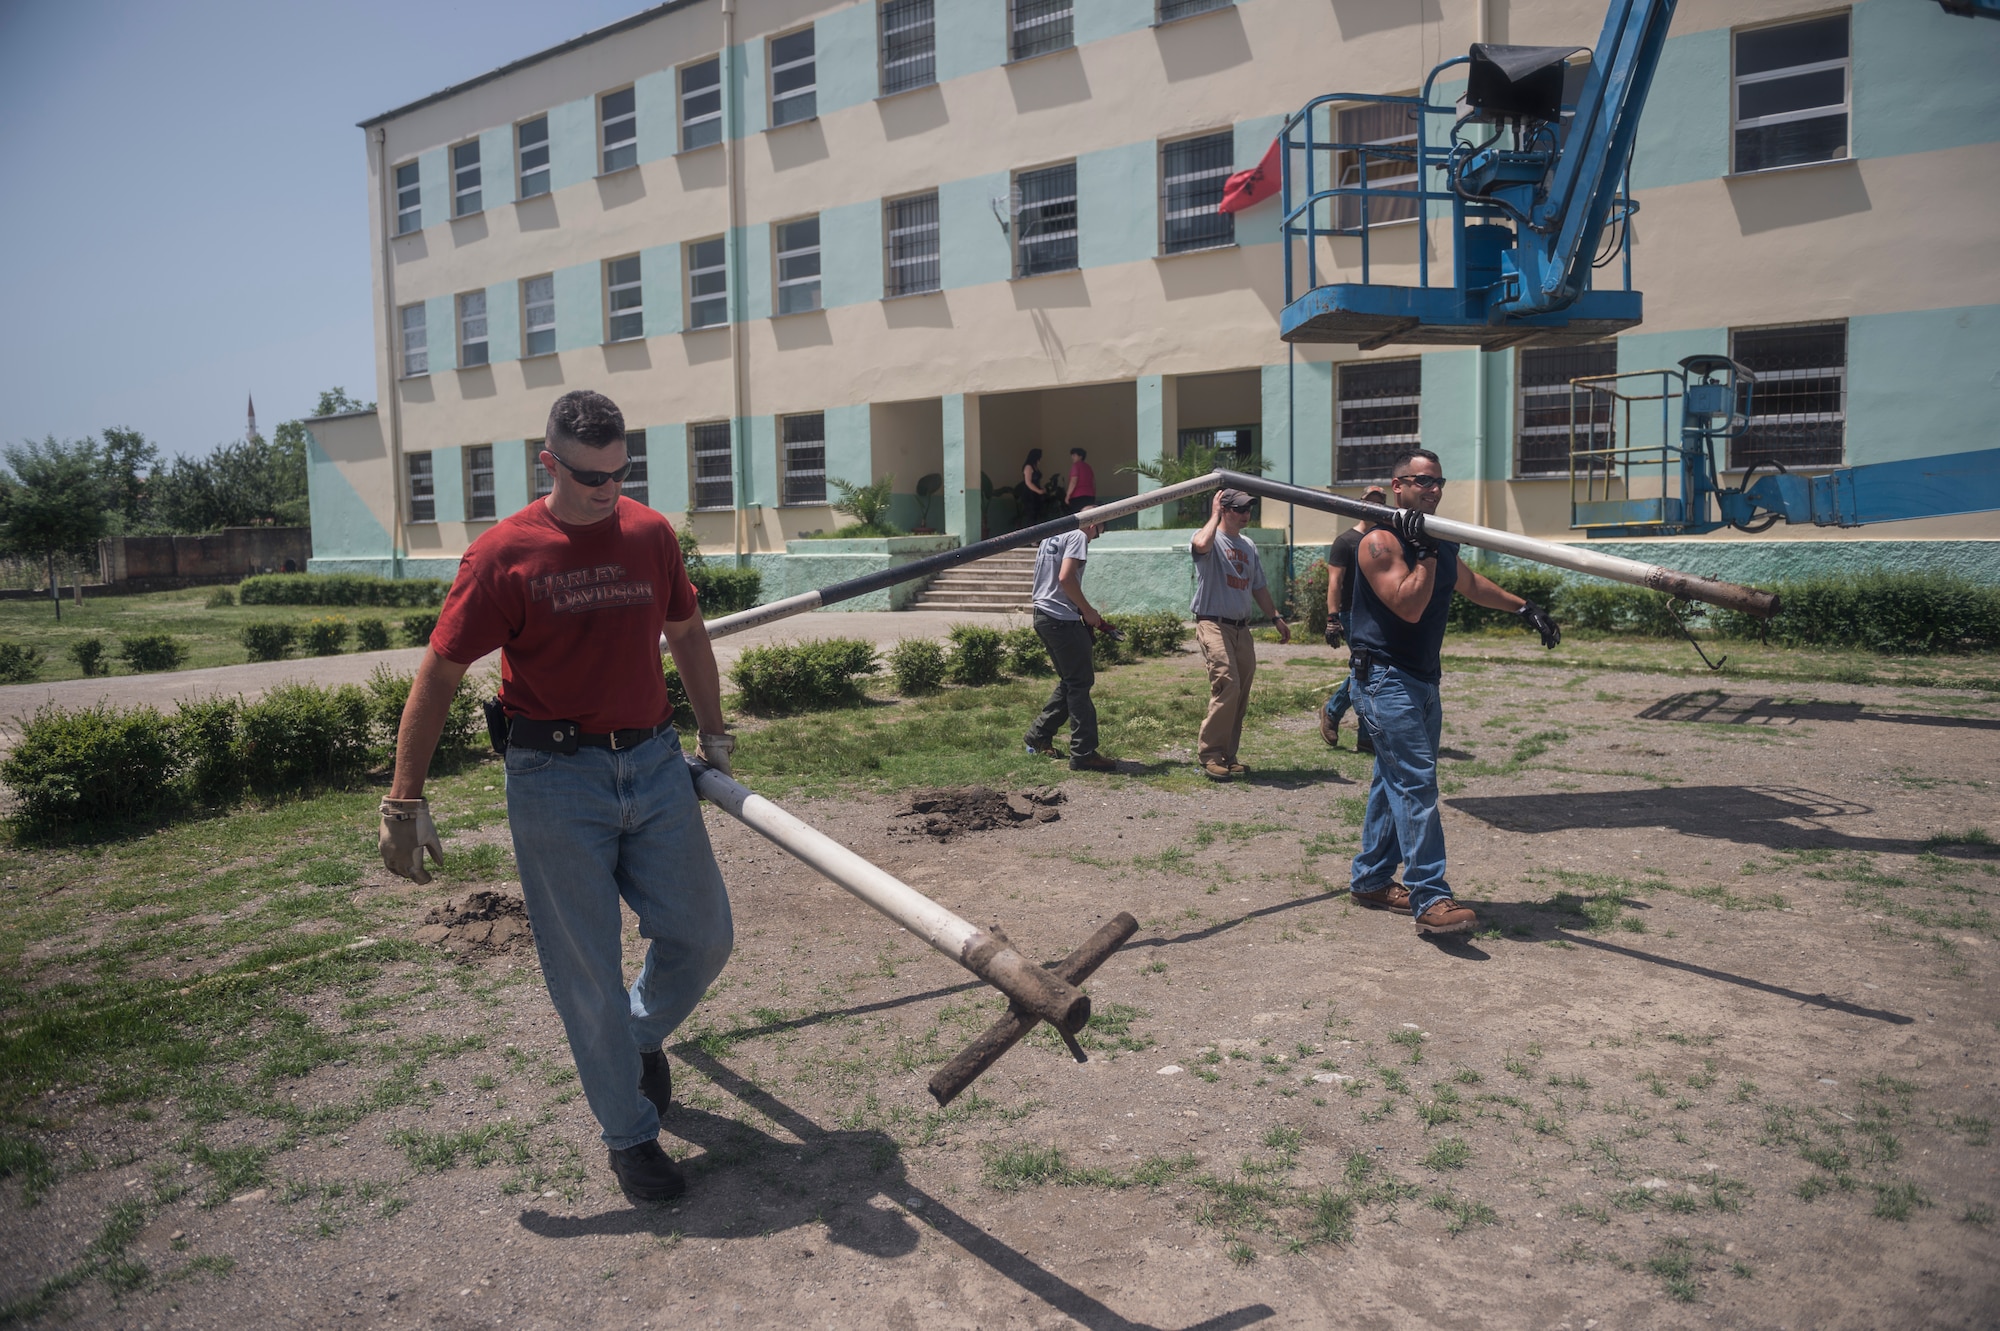 Soccer goal posts are removed from the local school in Mjede, Albania, to be reused for a new soccer field that Airmen from the 107th Civil Engineer Squadron, Niagara Falls Air Reserve Station, N.Y., are preparing during June 18-July 2, 2016. The Airmen did such work as cleaning up the grounds, replacing windows and painting as part of a Deployment For Training. (U.S. Air Force Photo by Staff Sgt. Ryan Campbell/Released)